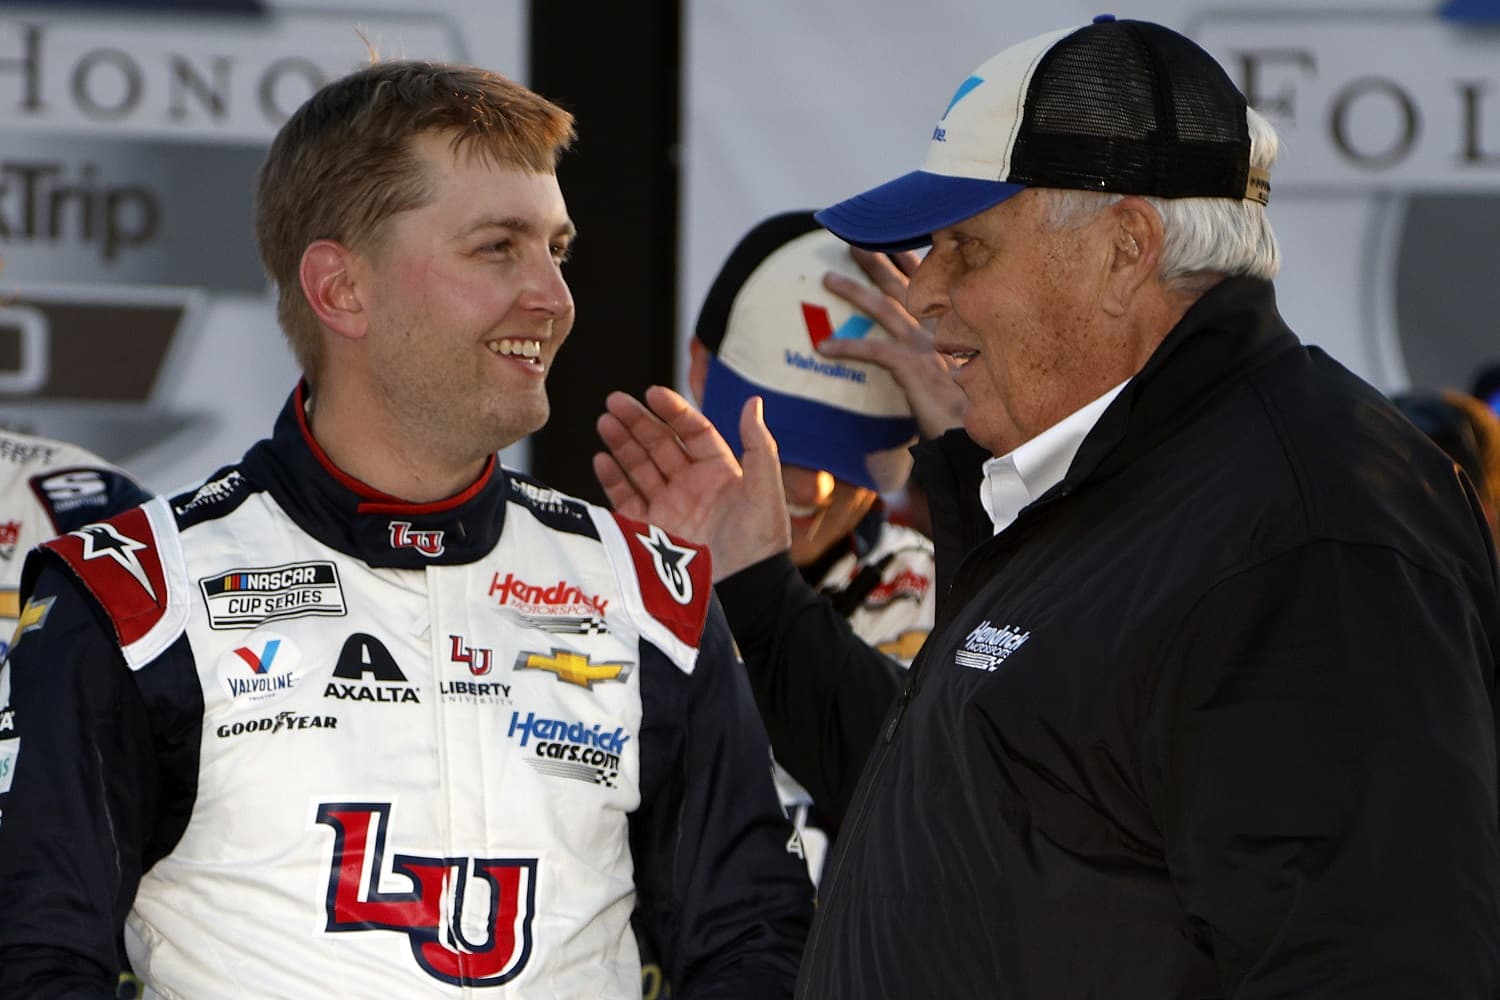 William Byron is congratulated by Hendrick Motorsports owner Rick Hendrick in Victory Lane after winning the NASCAR Cup Series Folds of Honor QuikTrip 500 at Atlanta Motor Speedway on March 20, 2022.